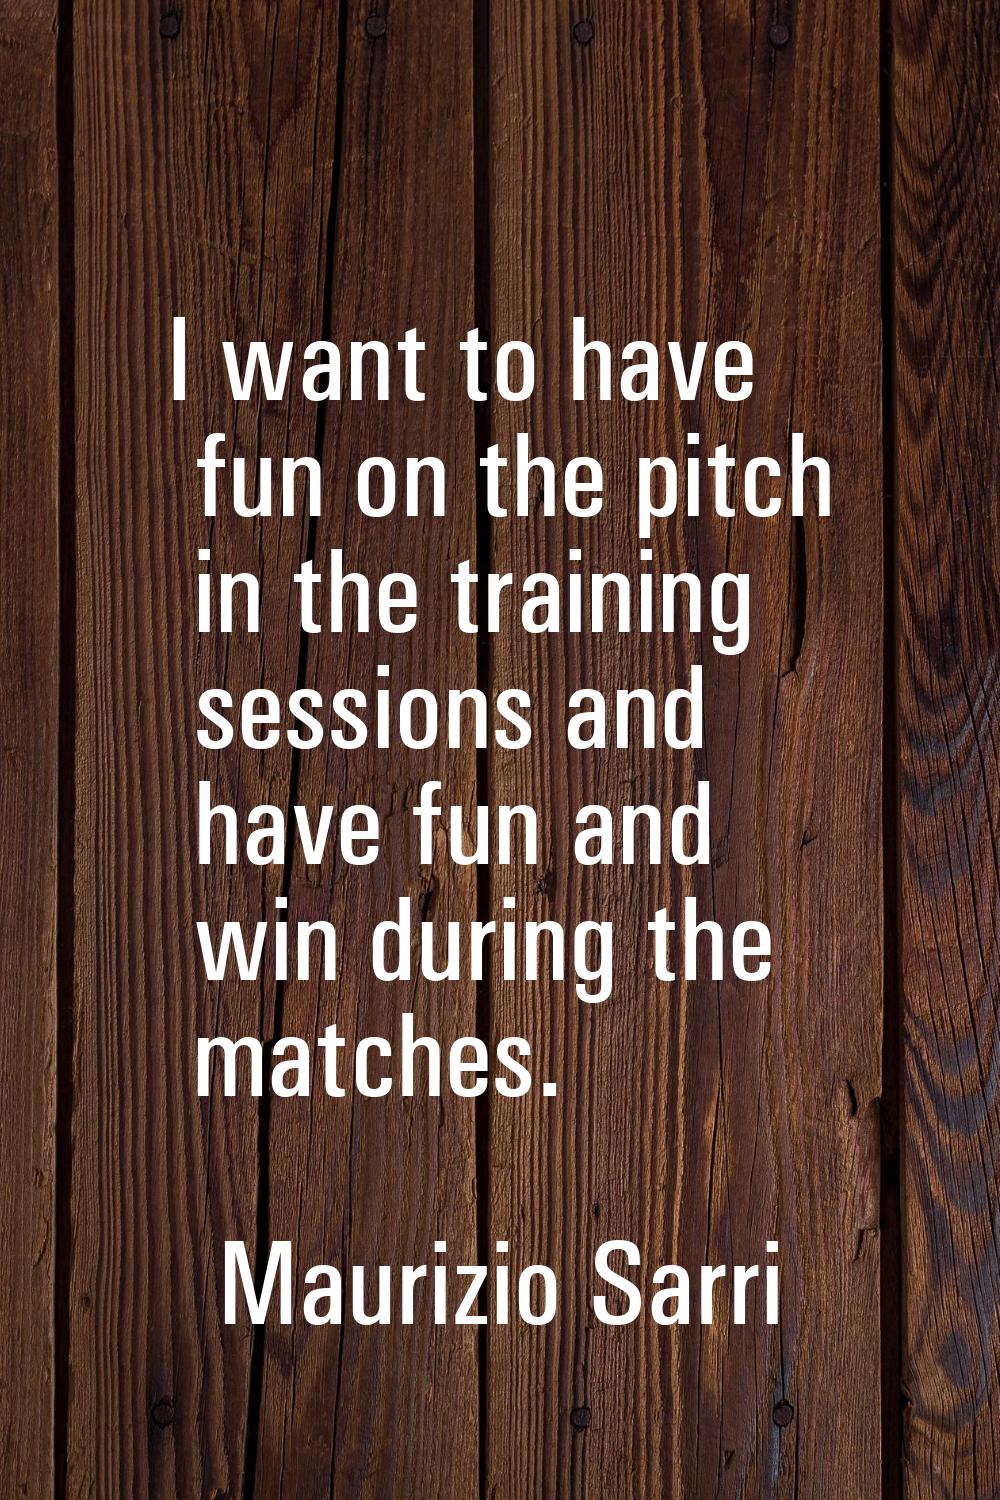 I want to have fun on the pitch in the training sessions and have fun and win during the matches.